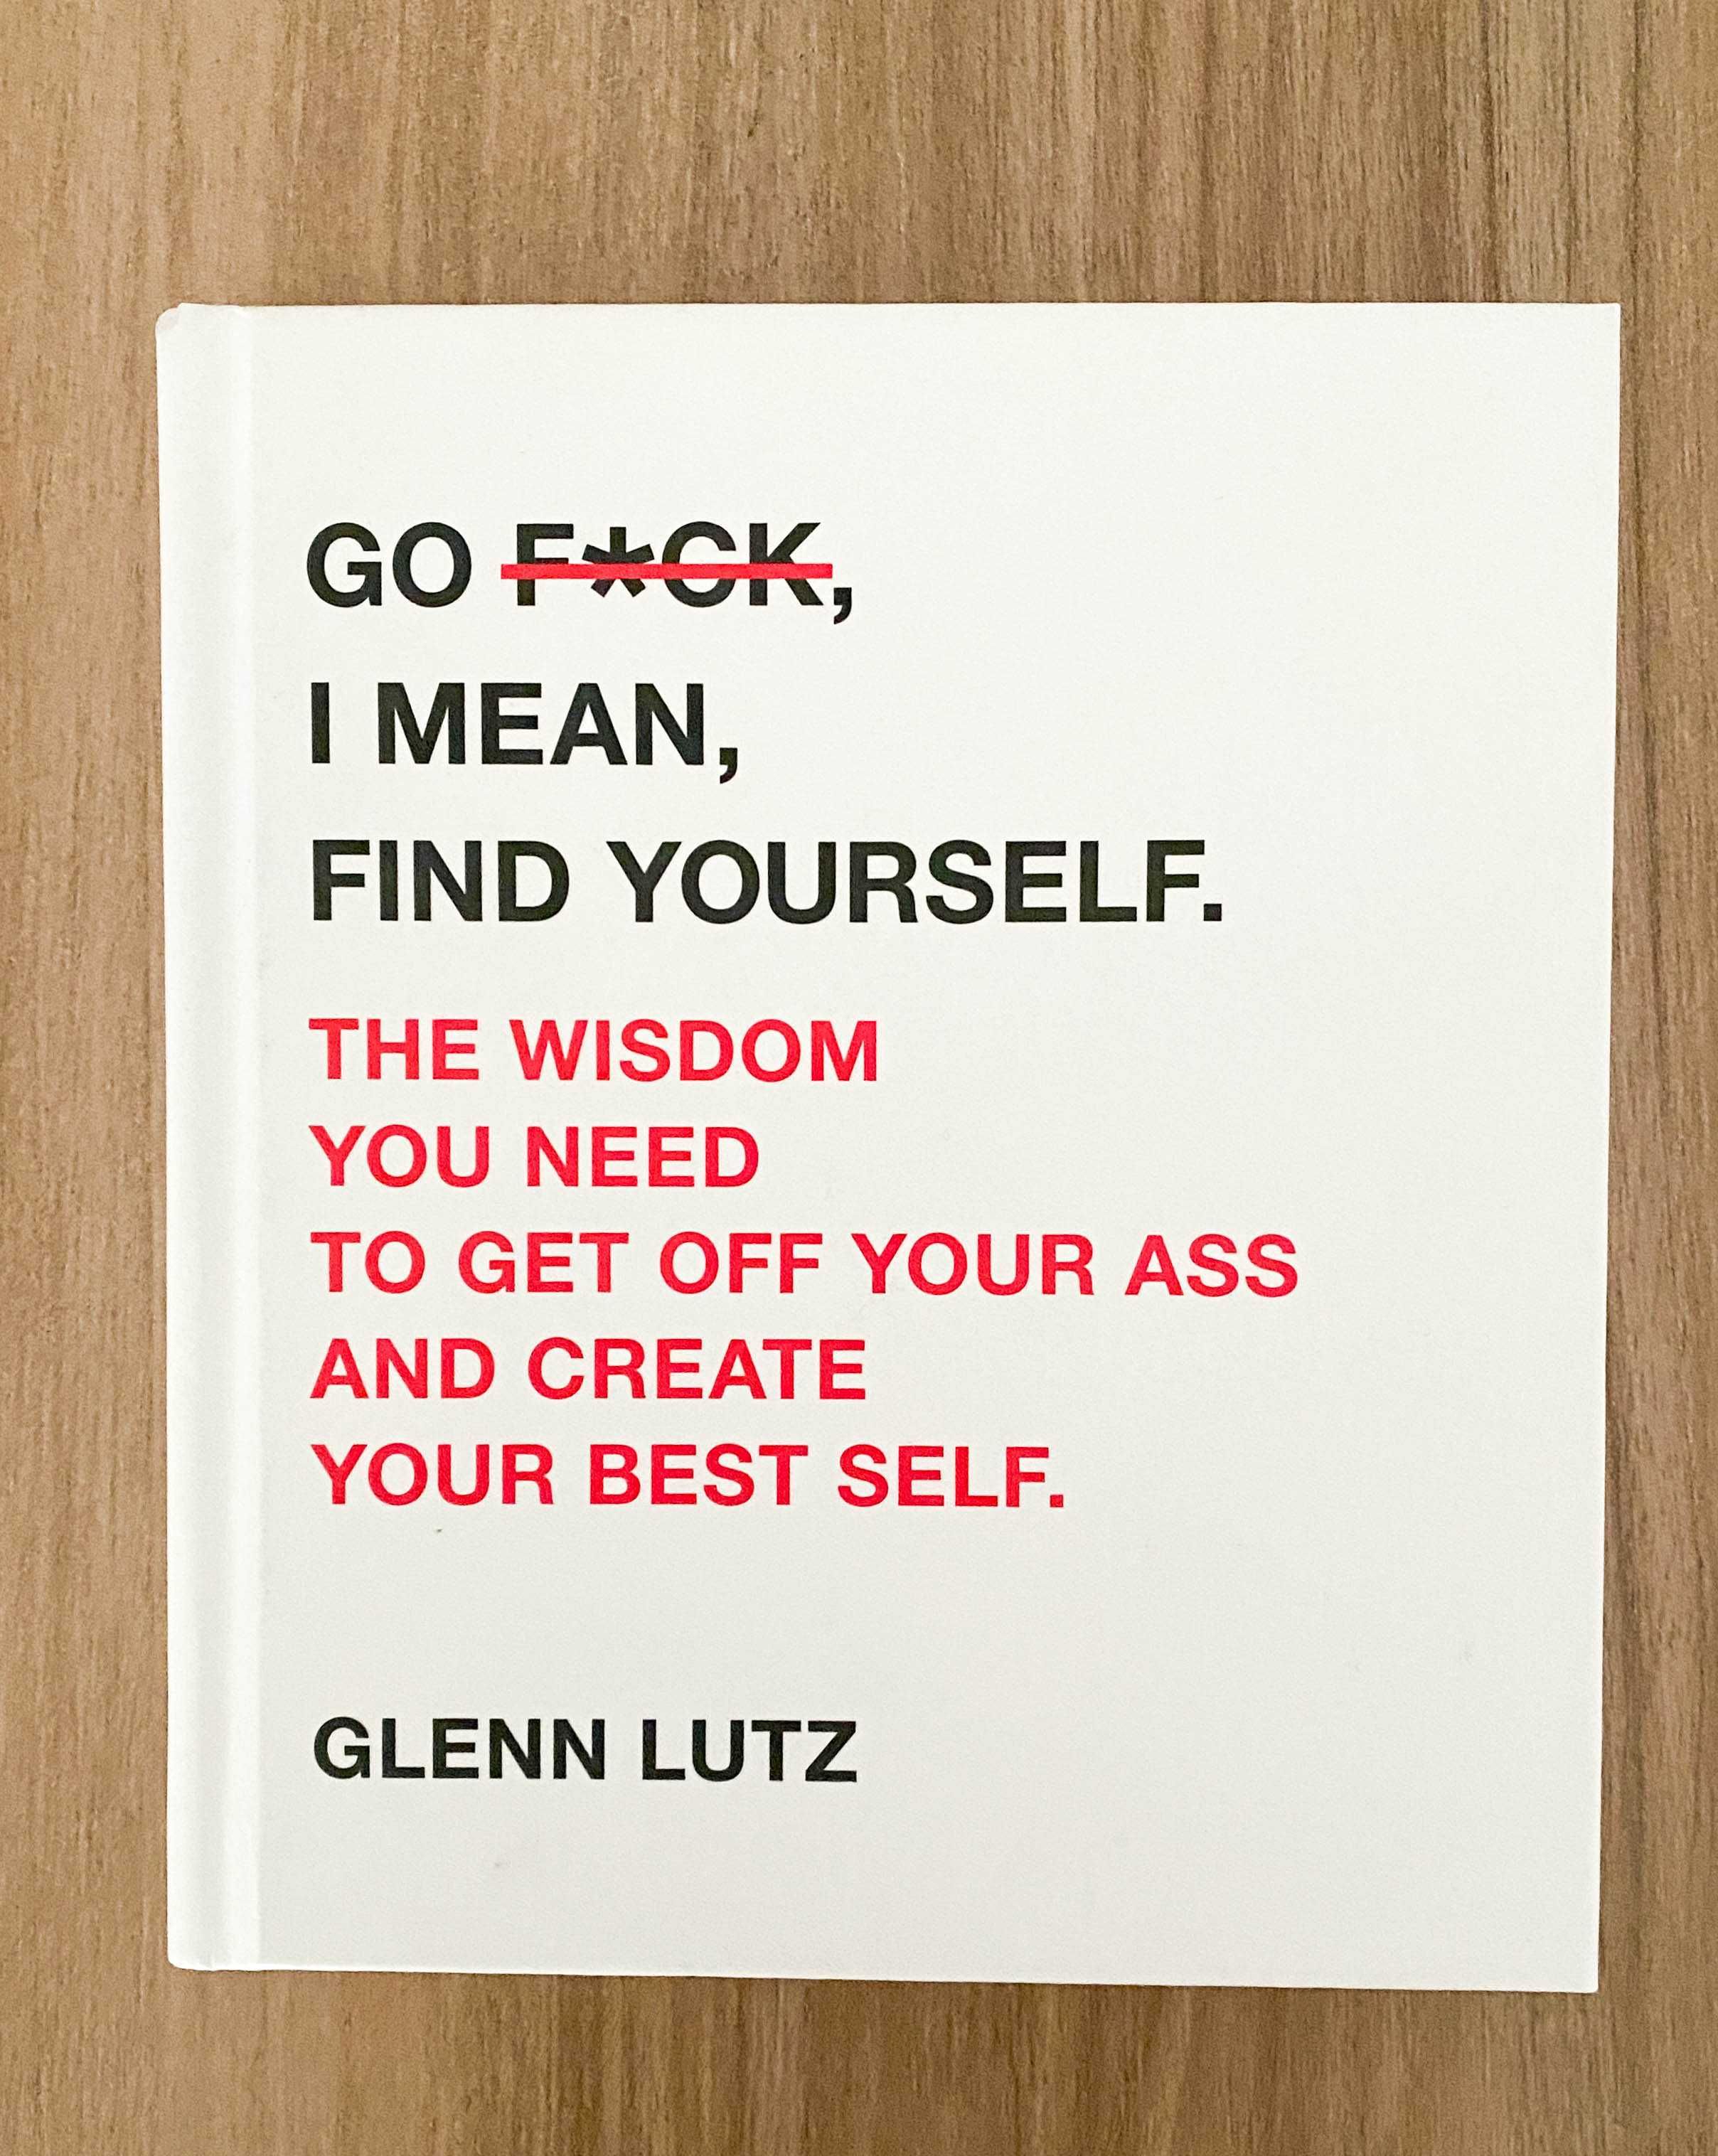 Go F*ck, I Mean, Find Yourself.: The Wisdom You Need to Get Off Your